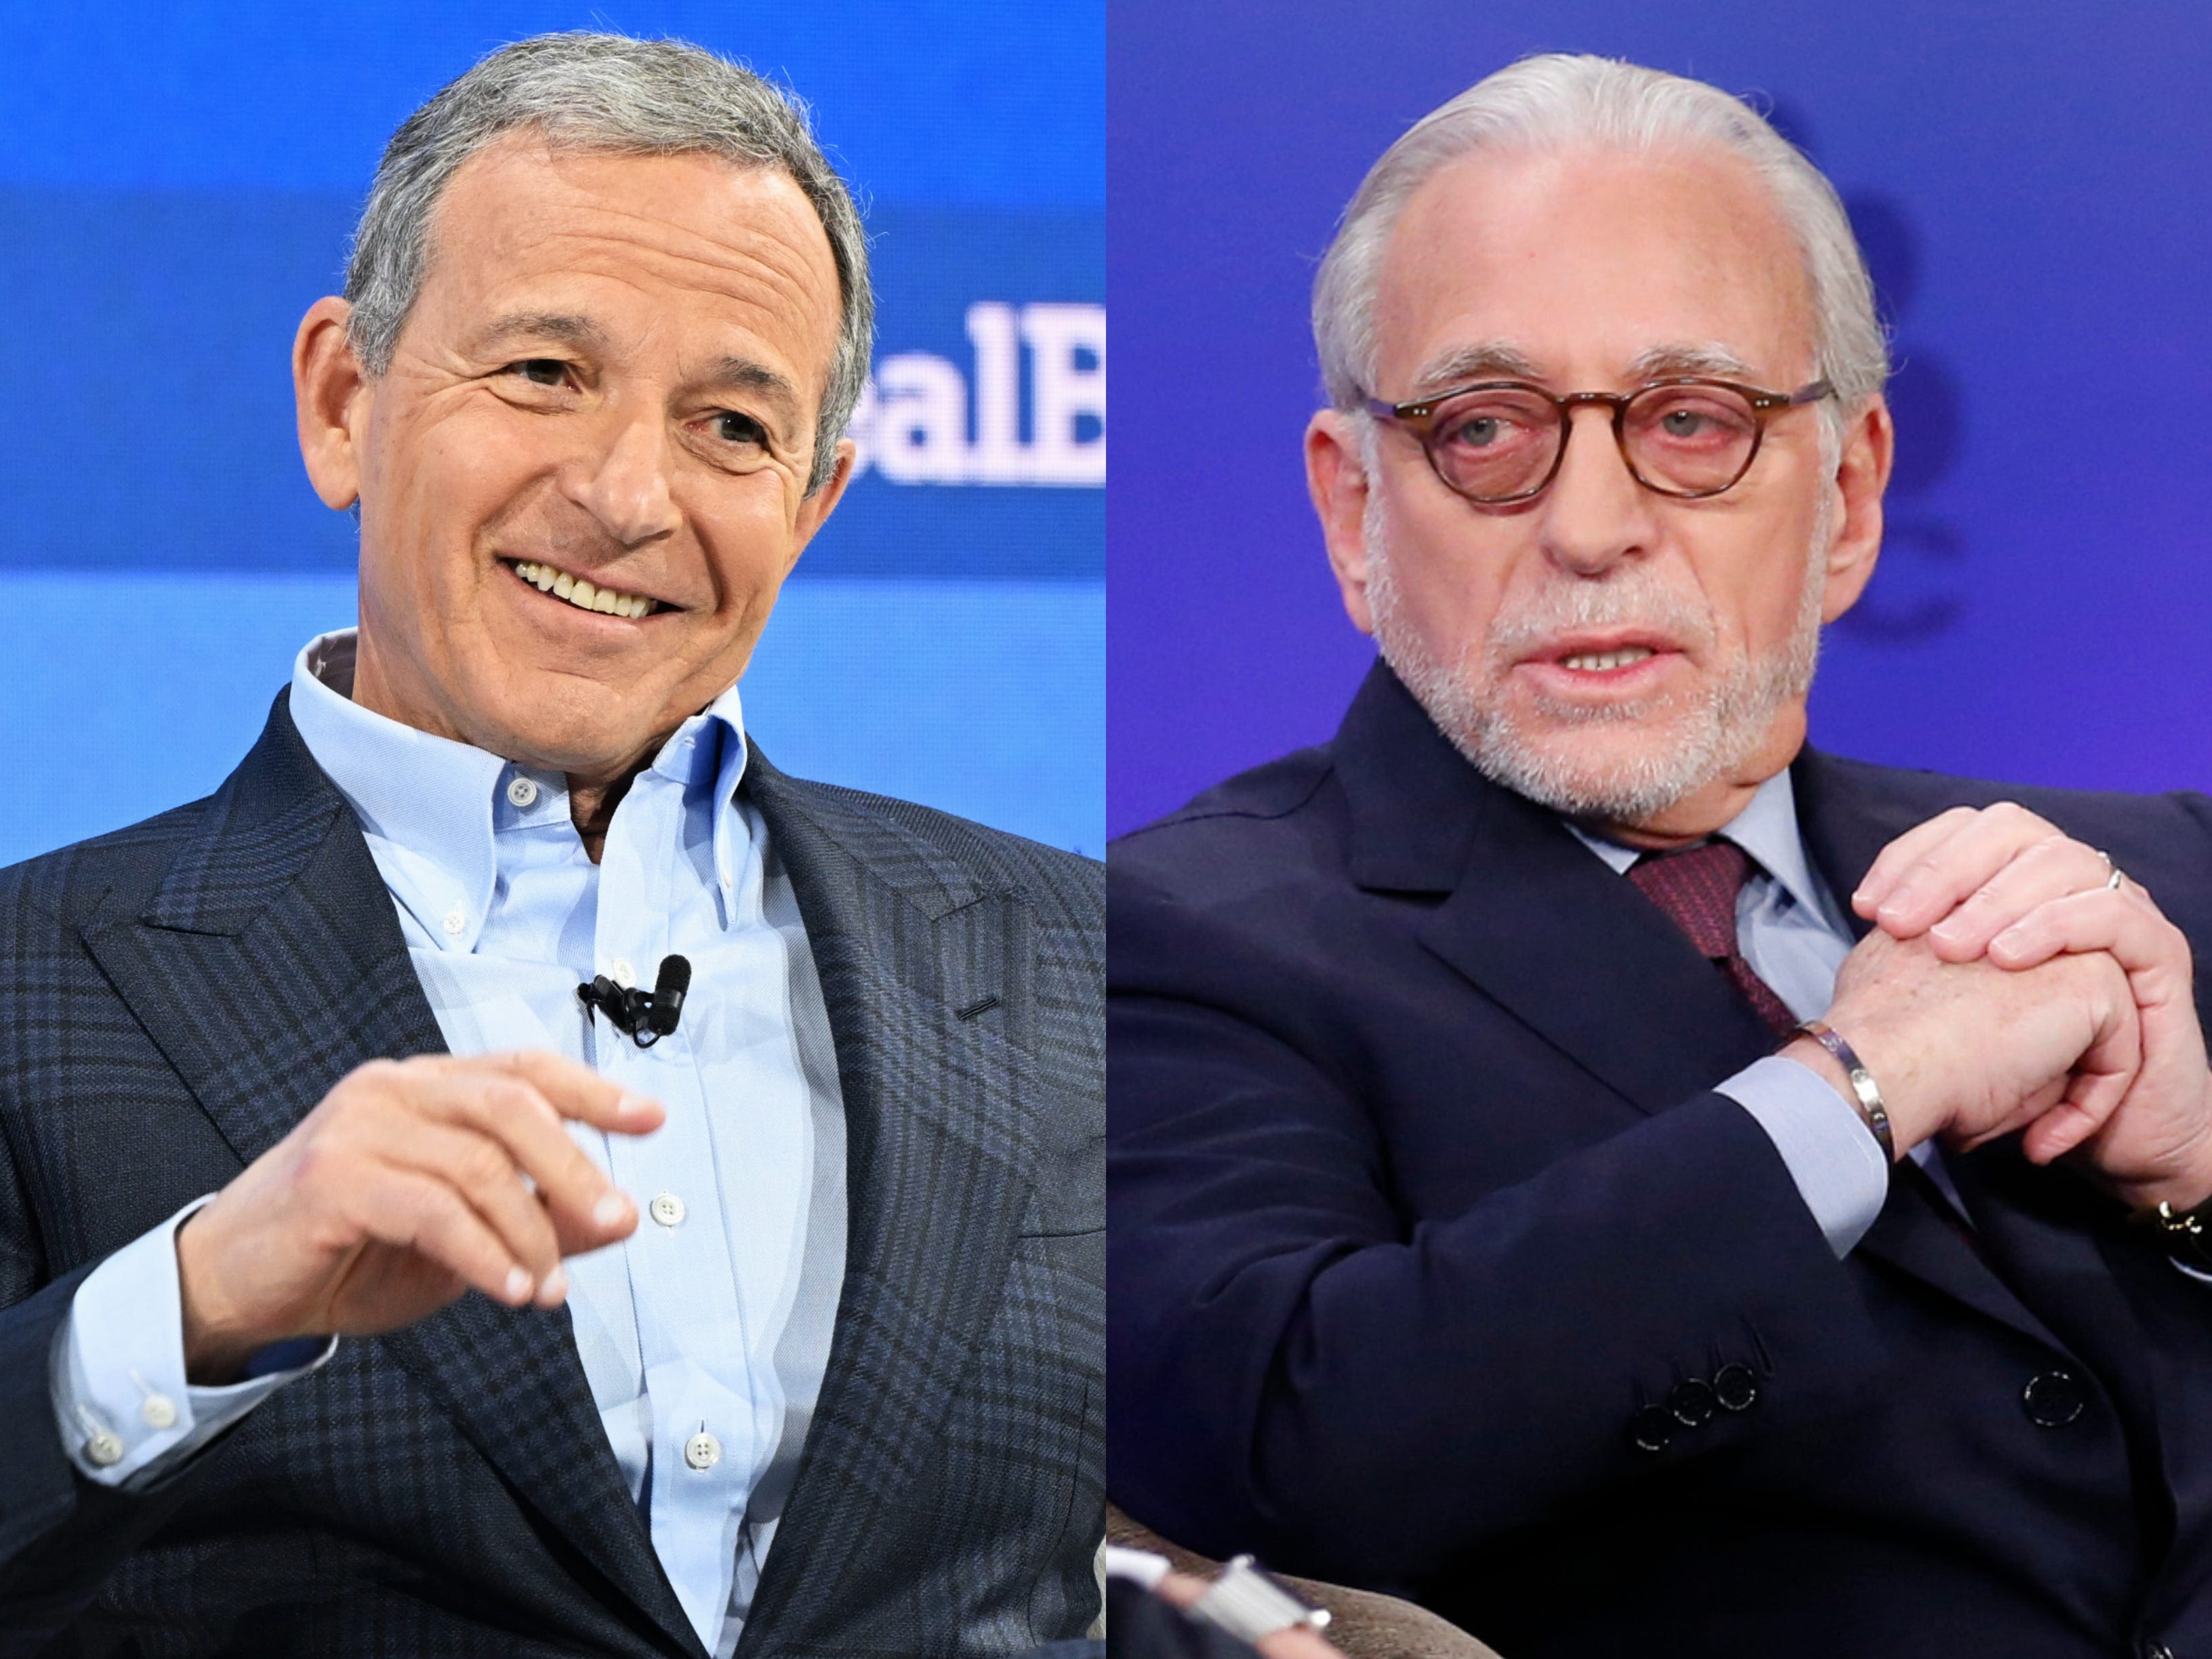 Disney's Bob Iger may be celebrating today after Nelson Peltz's latest move